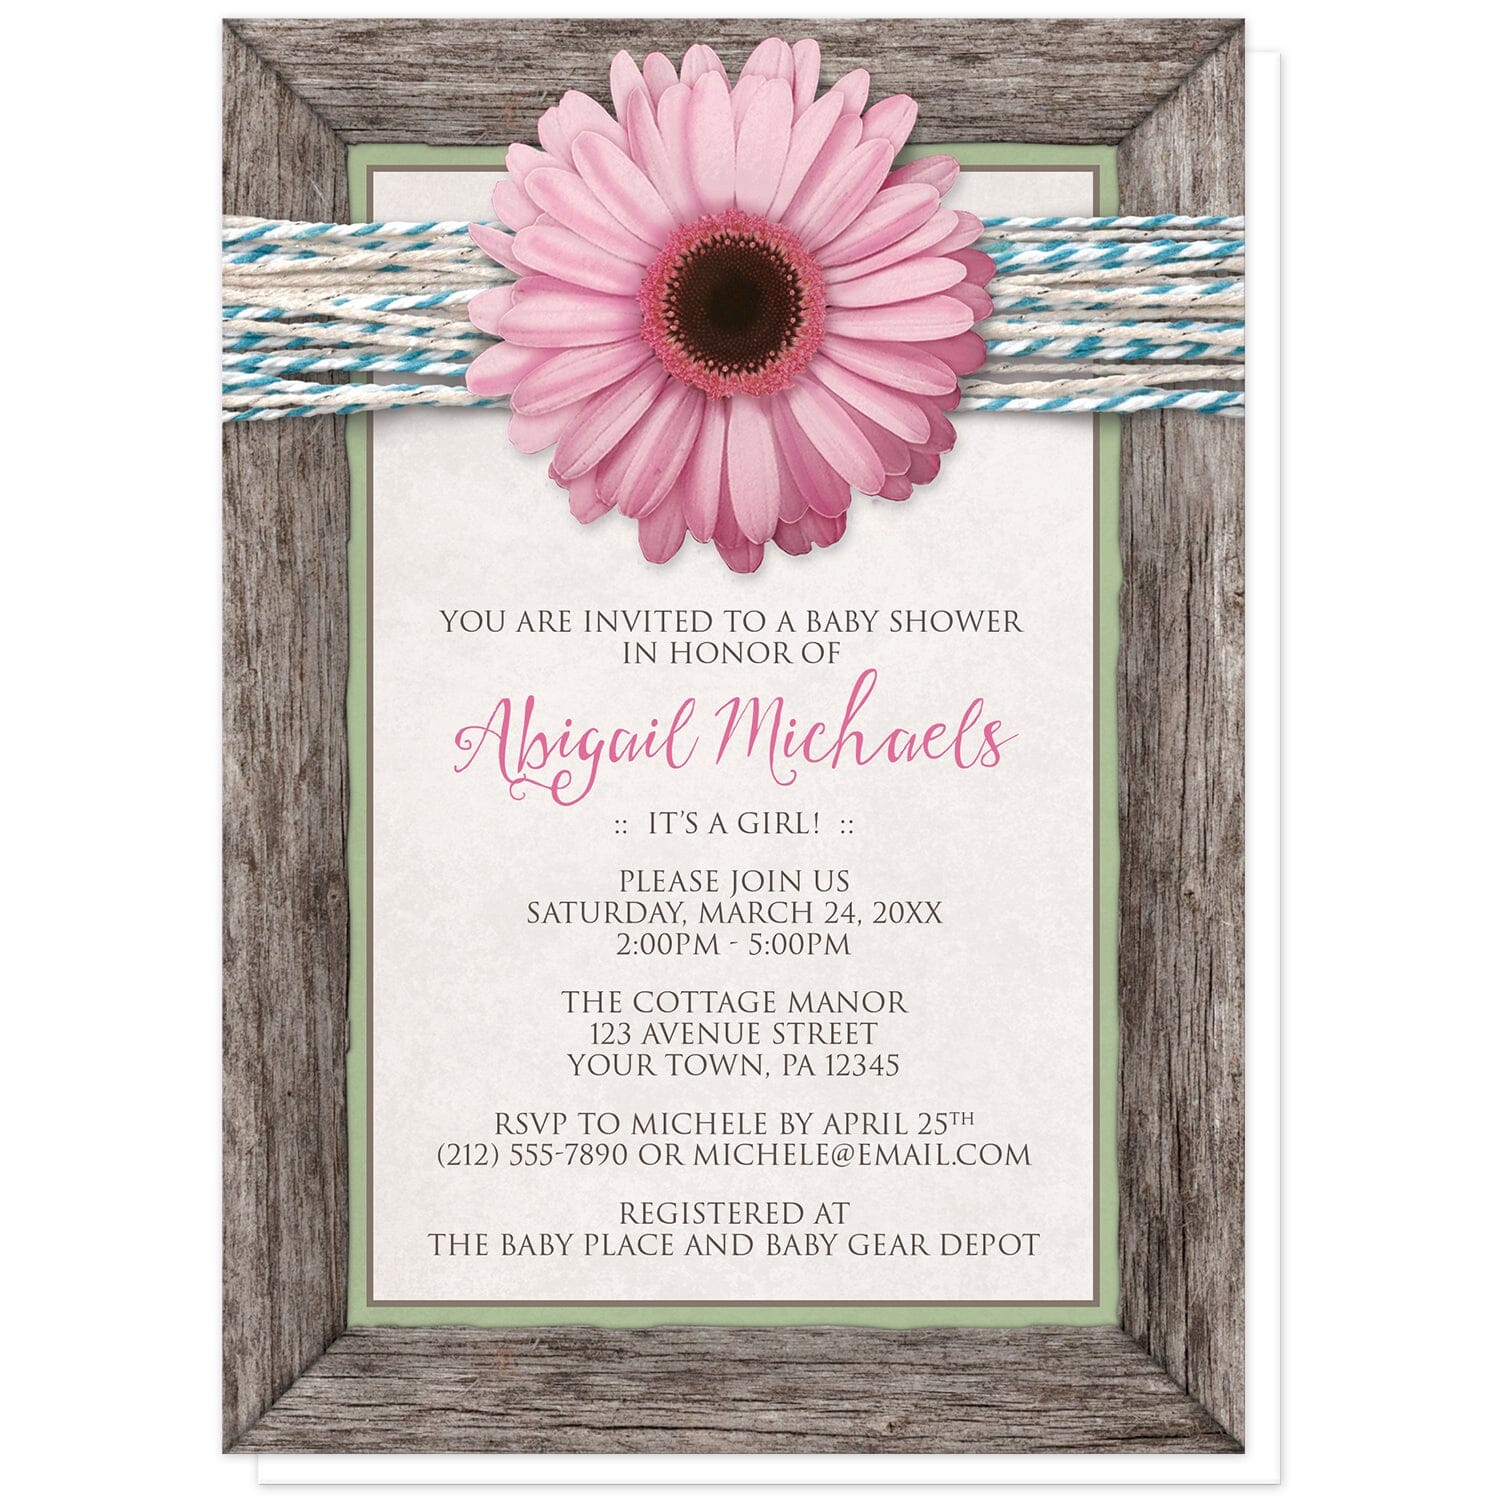 Rustic Chic Pink Daisy Turquoise Wood Baby Shower Invitations at Artistically Invited. Southern-inspired rustic chic pink daisy turquoise wood baby shower invitations with an illustration of a pink daisy flower over a turquoise, white, and off-white twine design along the top. Your personalized baby shower celebration details are custom printed in brown and pink over an off-white background with a rustic wood frame design around it.